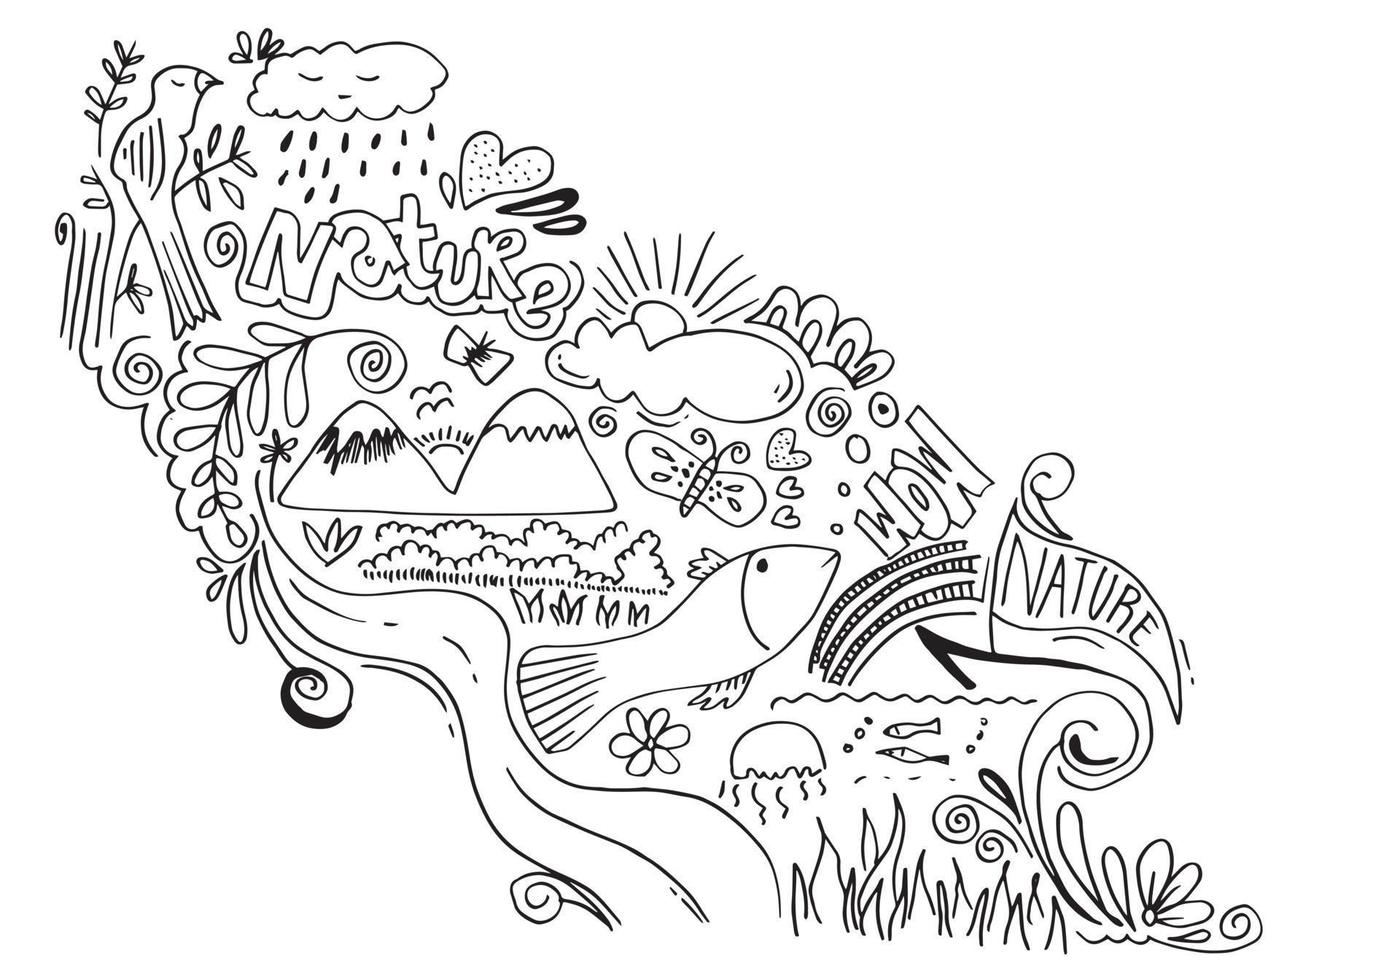 Creative art doodles hand drawn Design illustration with text Nature and wow. vector